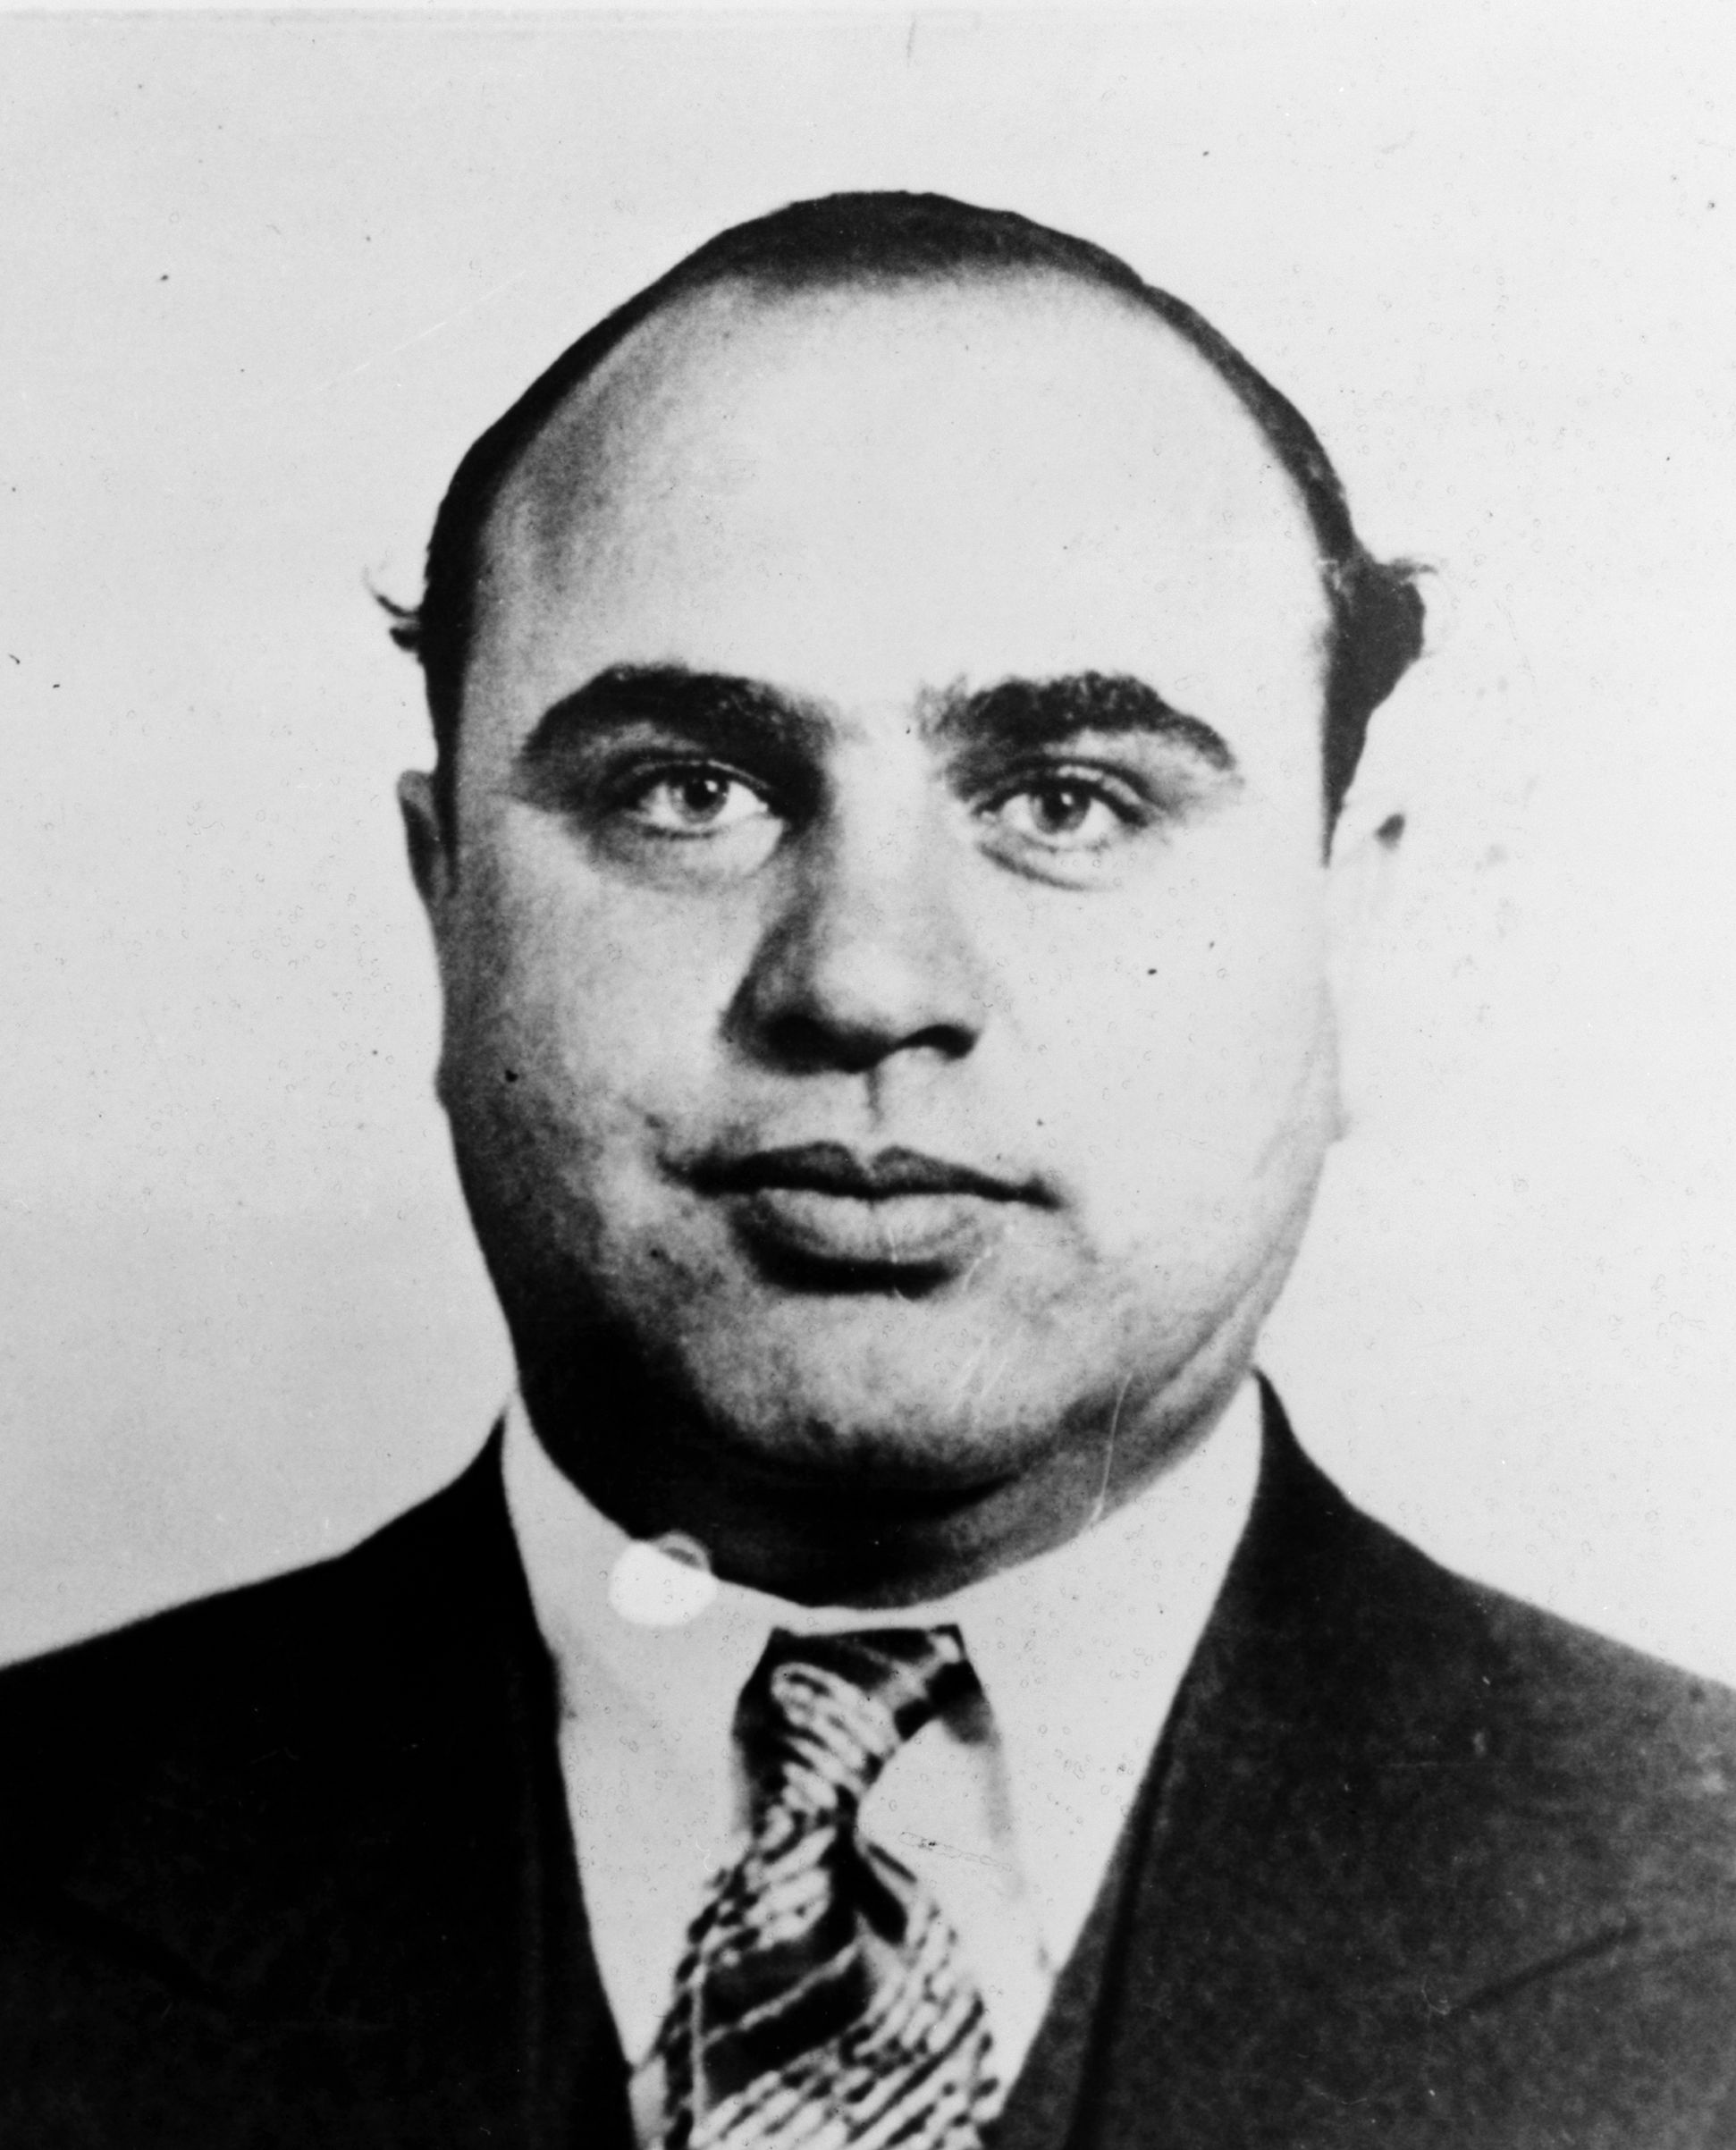 Mobster AL CAPONE Glossy 8x10 Photo Criminal Mob Reprint American Gangster 